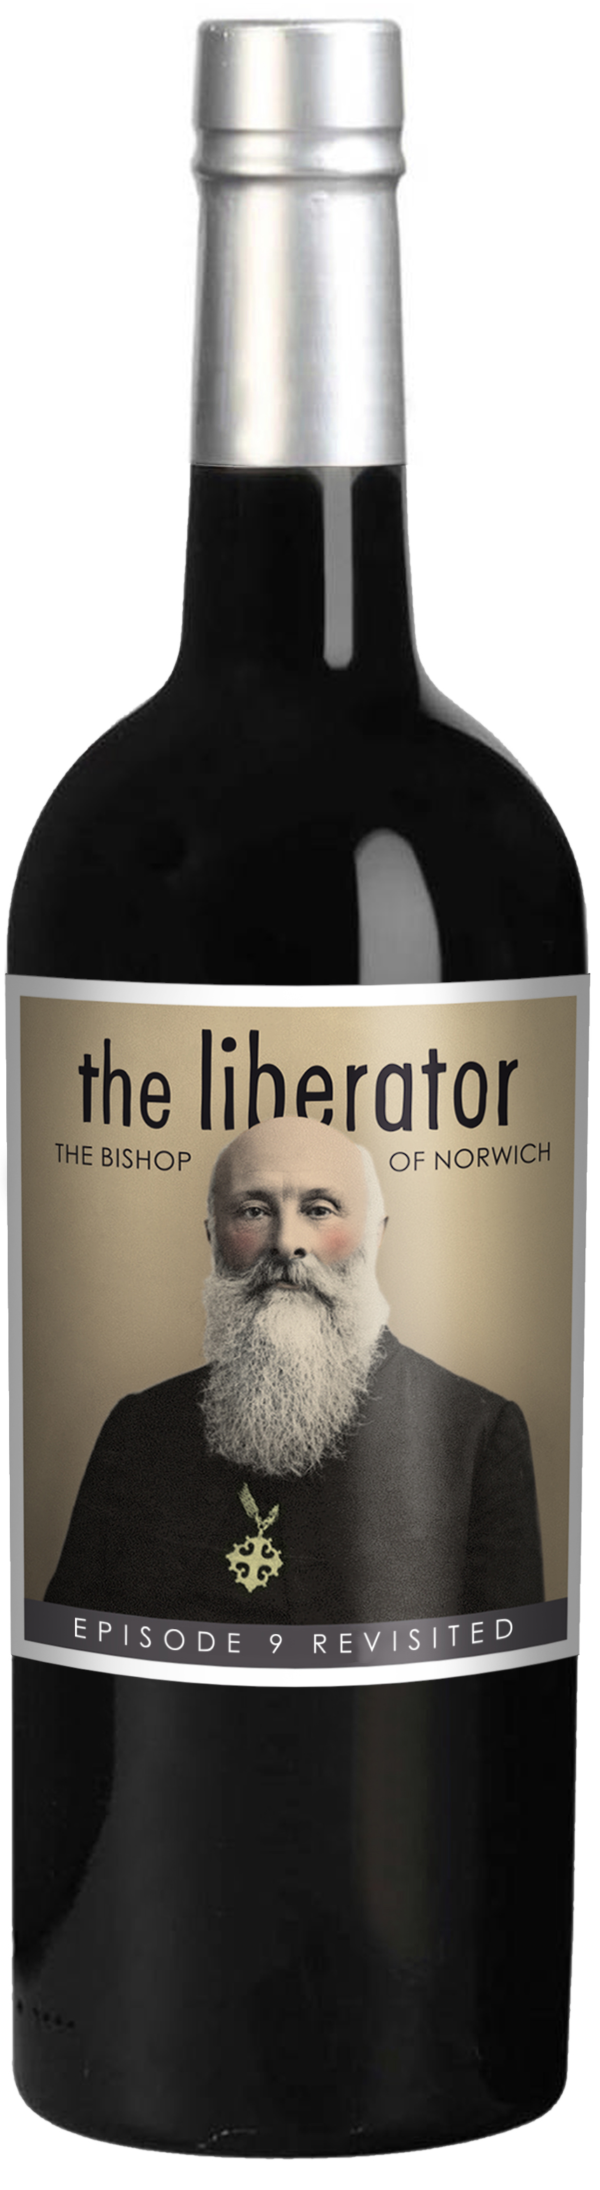 Port and Port Style - THE BISHOP OF NORWICH. Stellenbosch